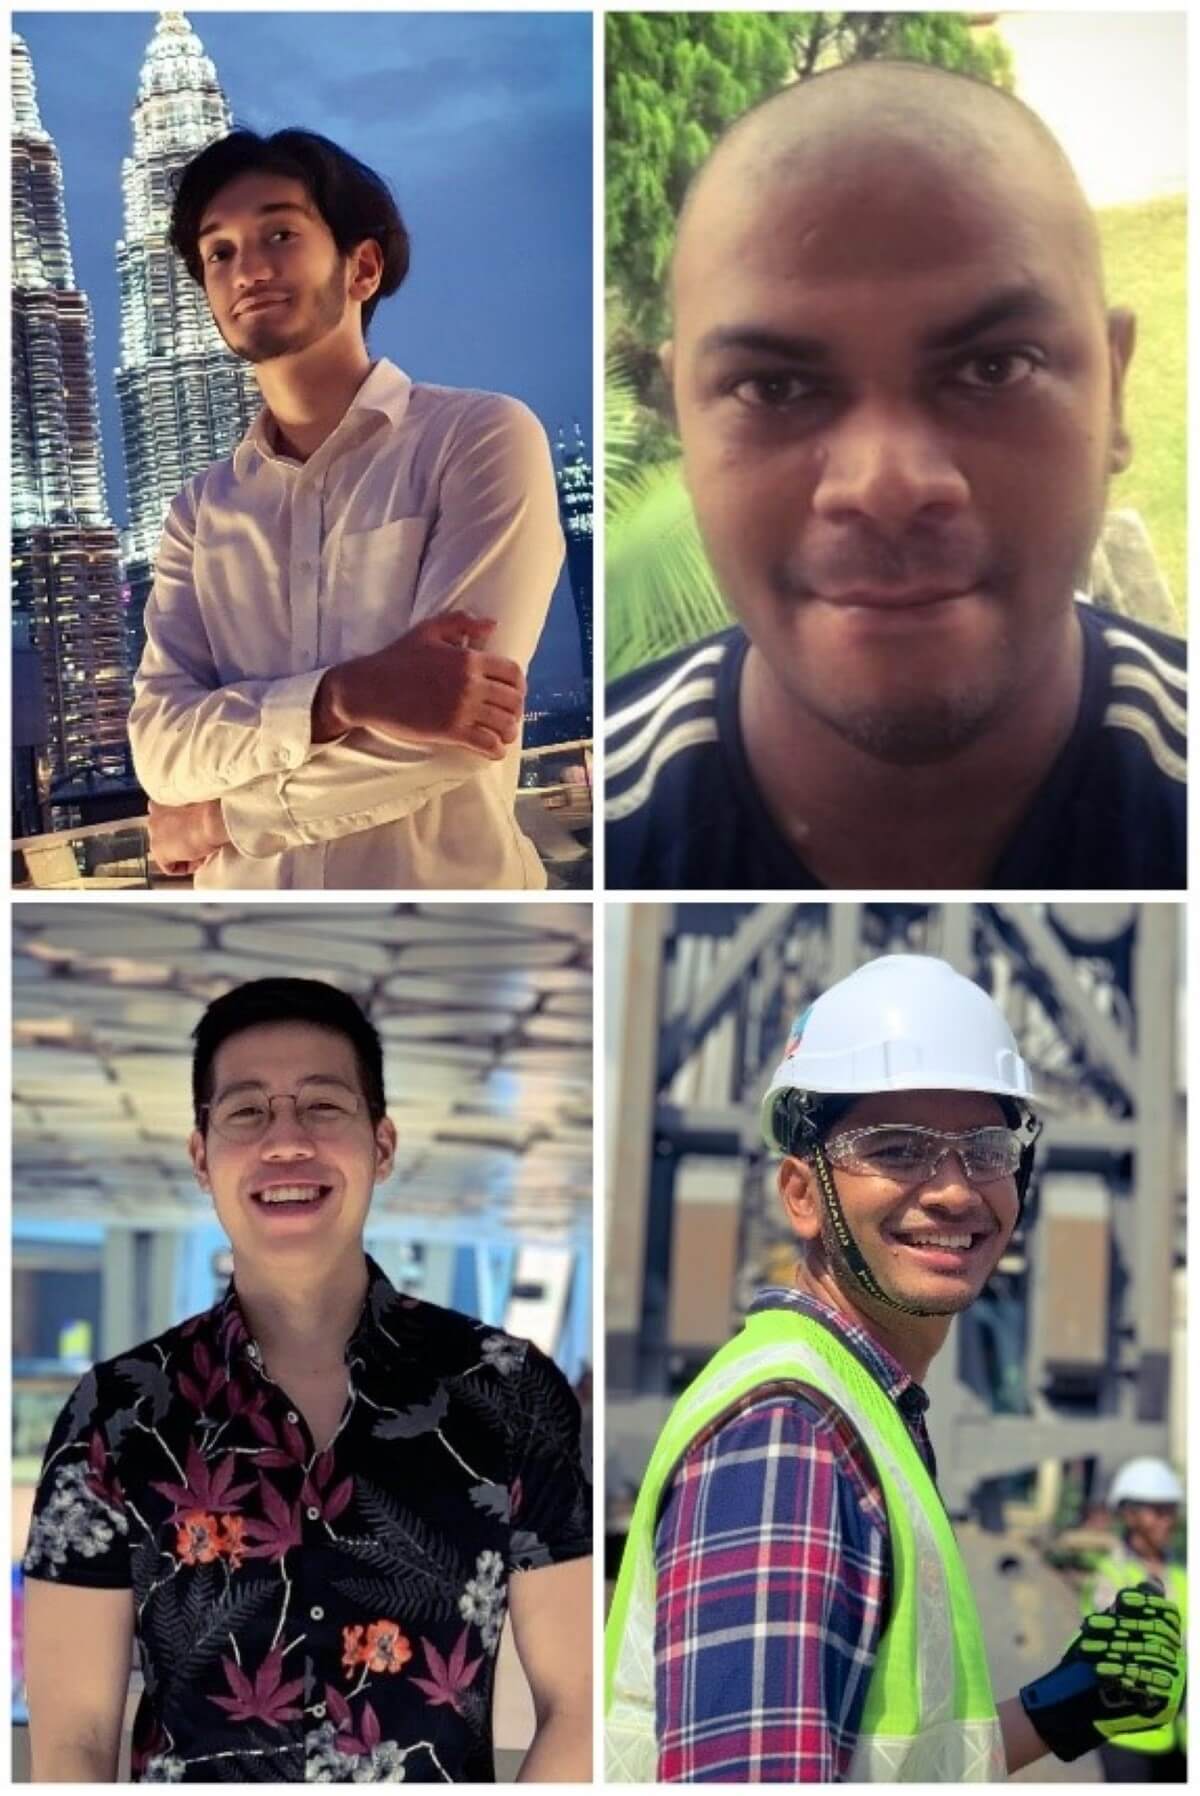 A collage of portraits of four males. Clockwise from top left – a mid-shot of a smug-looking male with facial hair and olive skin in a white button up with his arms crossed, posing with the Petronas twin towers in the background; a close-up of a haughty-looking bald male with some facial hair and dark skin, wearing a navy tee with three white stripes across each shoulder; a mid-shot of a smiling male with olive skin and construction site safety gears on; wearing a pink and navy flannel button up underneath; and finally, a mid-shot of a smiling male with fair skin and clear glasses on, wearing a dark floral shirt